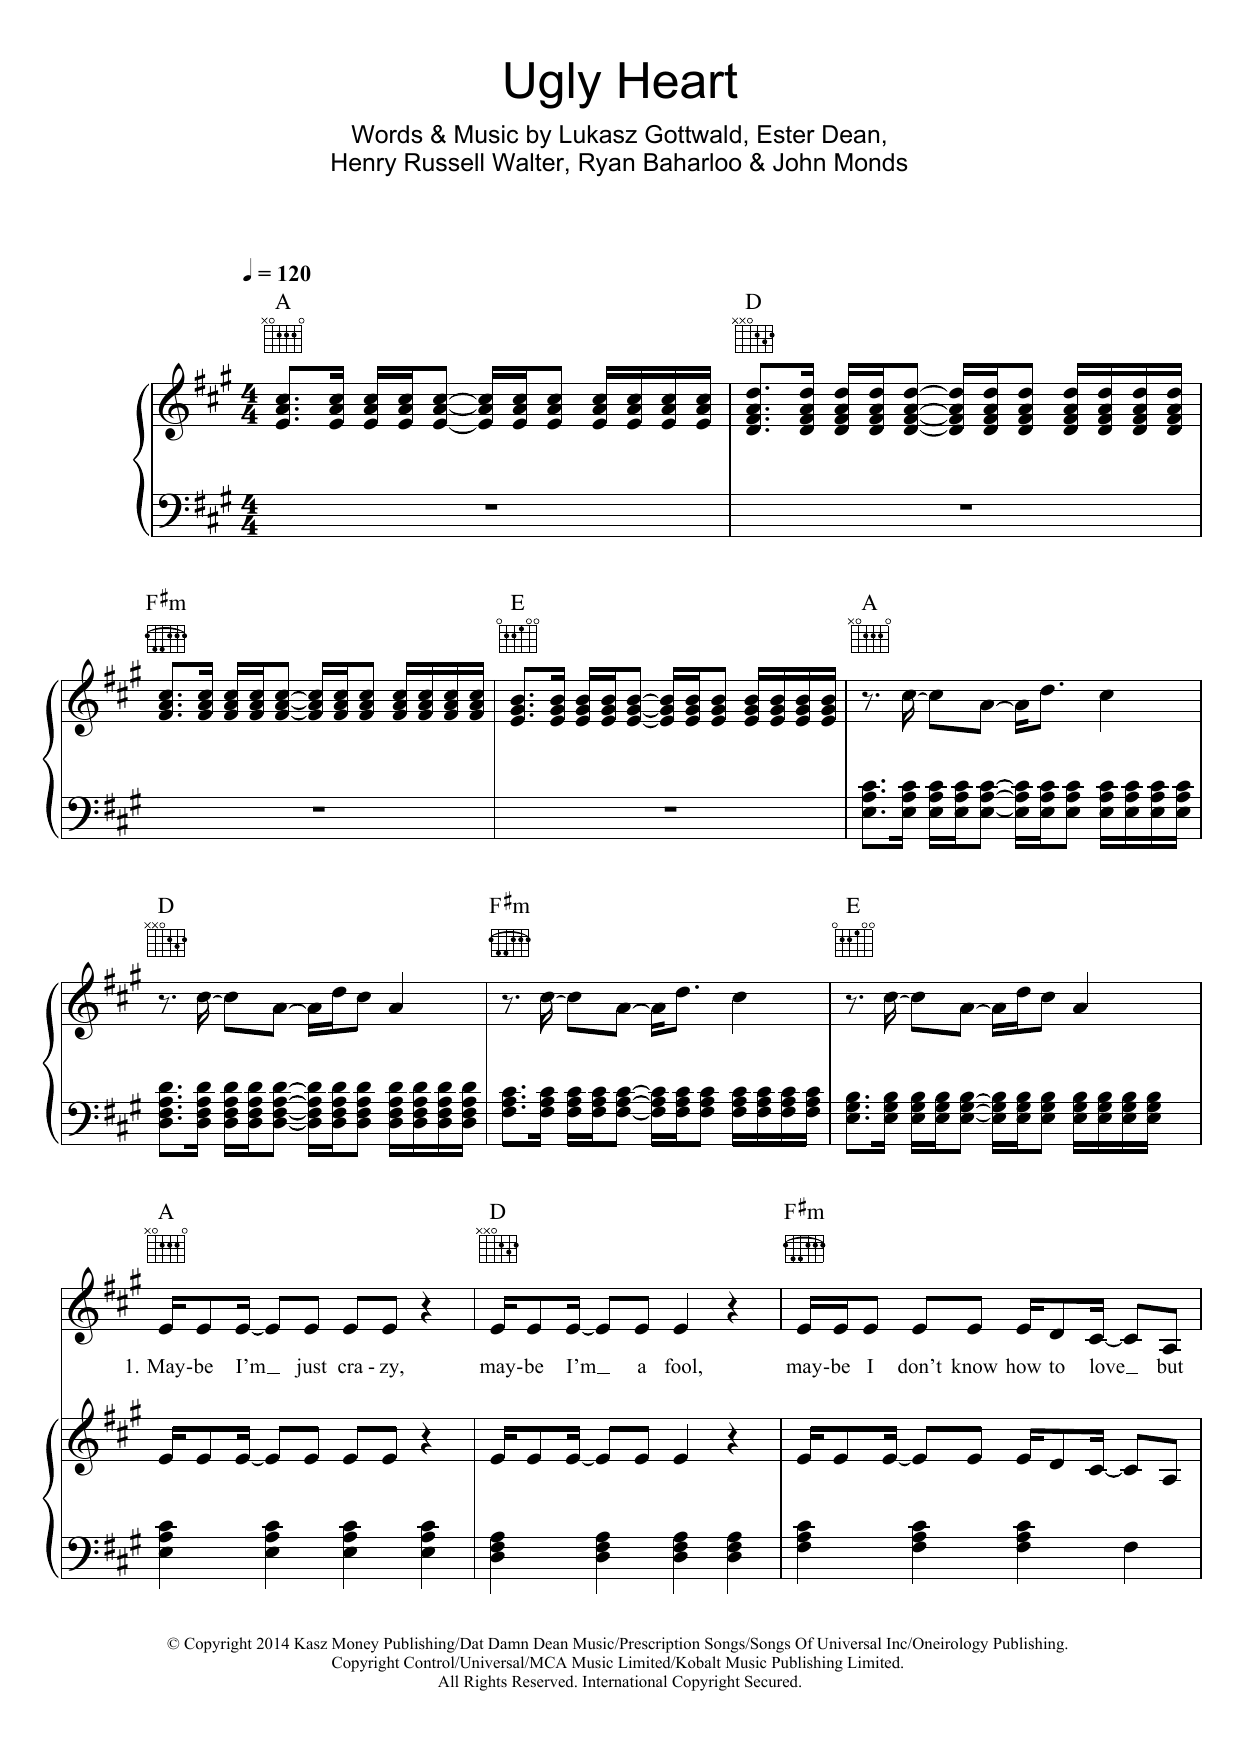 Download G.R.L. Ugly Heart Sheet Music